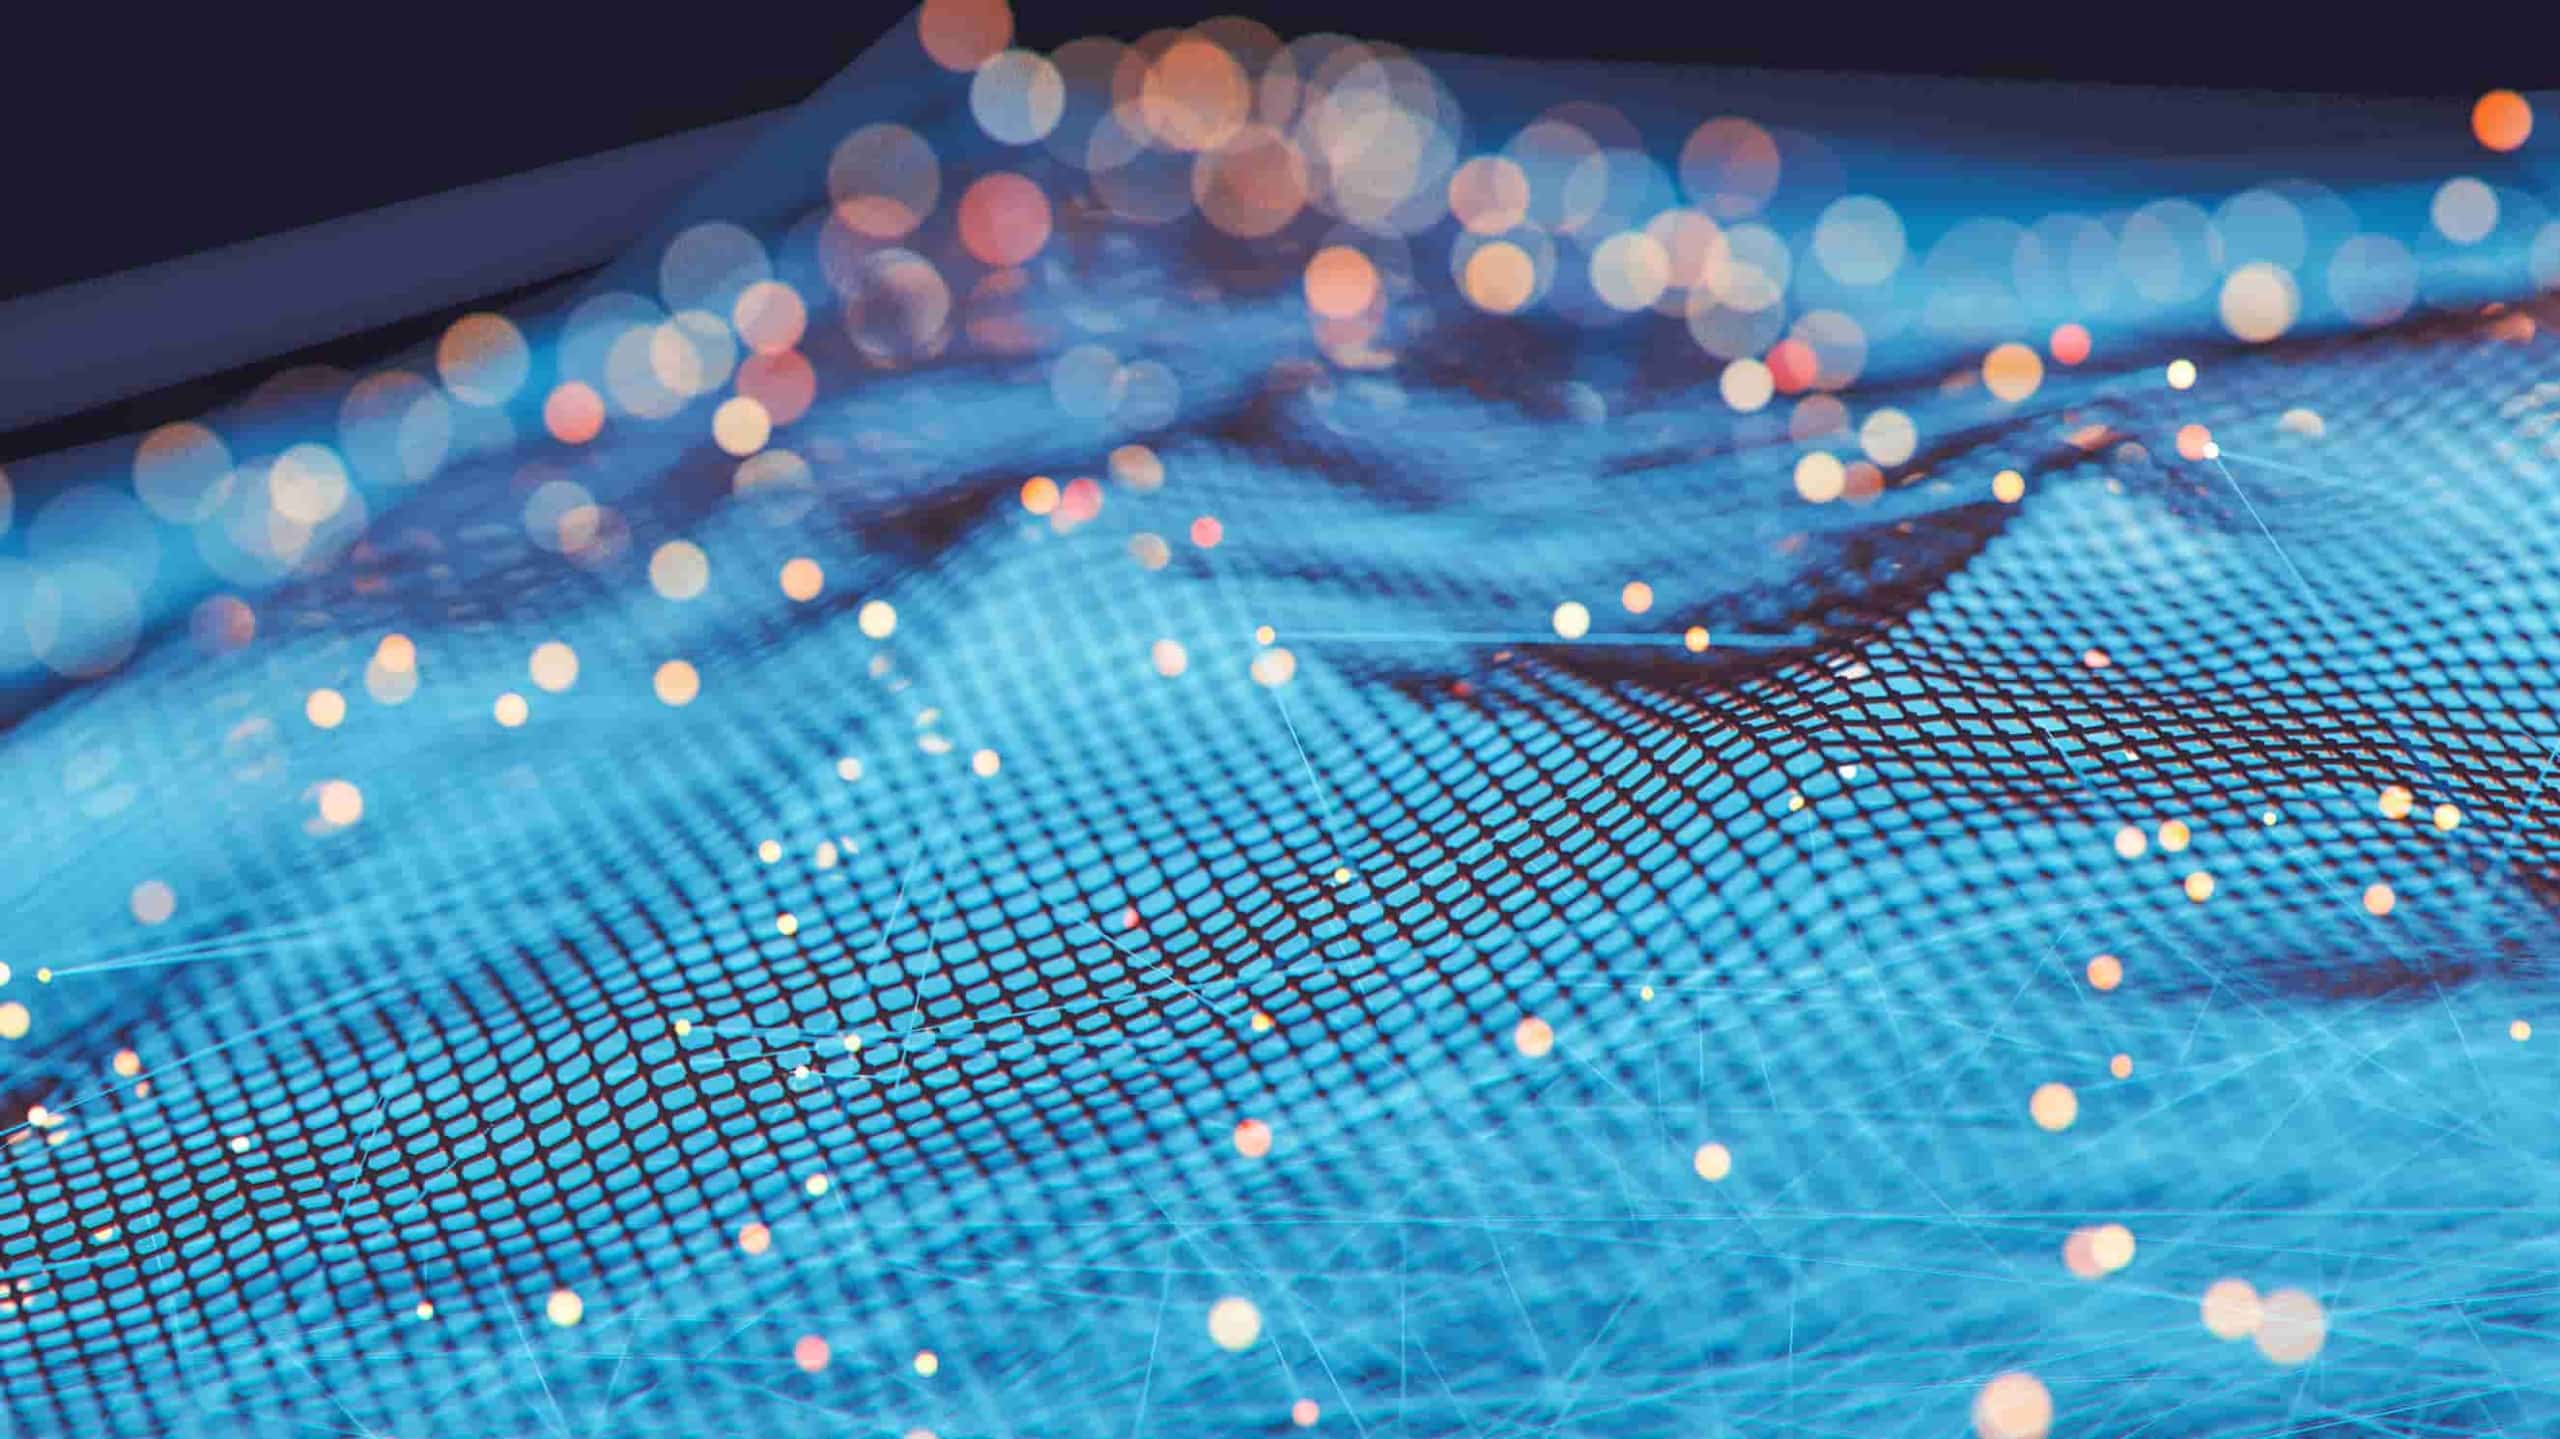 Close-up image of a blue digital network grid with glowing nodes and blurred lights in the background, symbolizing connectivity and advanced technology.